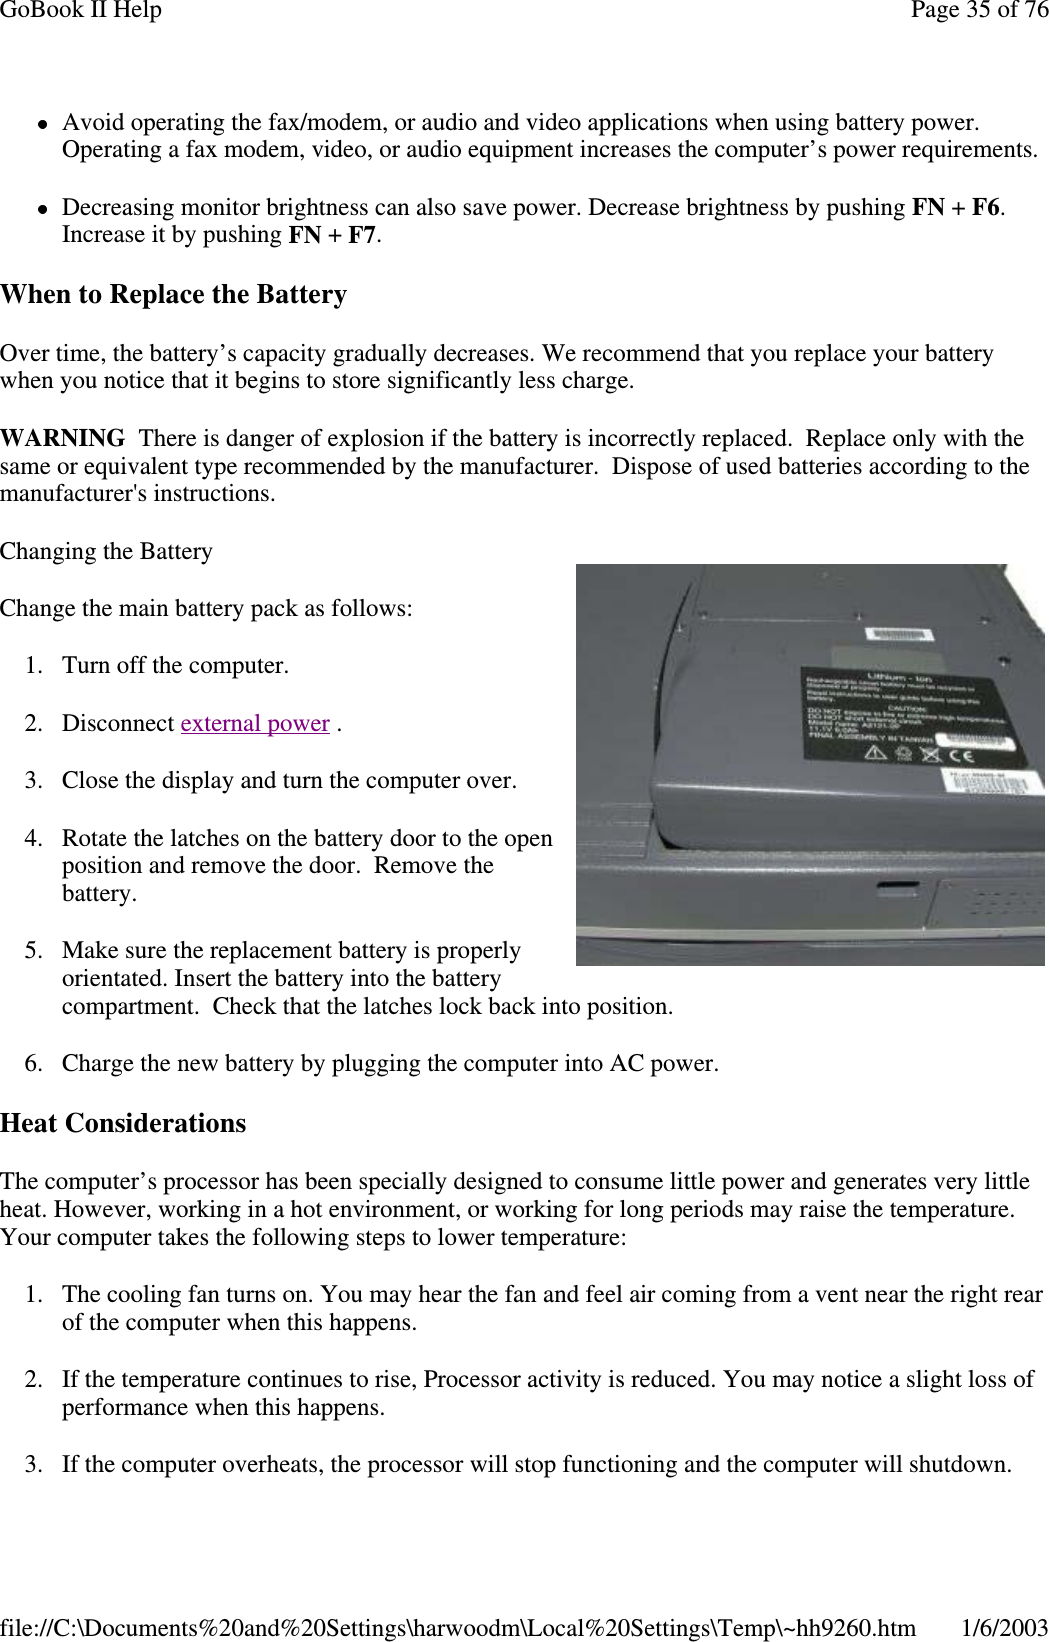 Avoid operating the fax/modem, or audio and video applications when using battery power.Operating a fax modem, video, or audio equipment increases the computer’s power requirements.Decreasing monitor brightness can also save power. Decrease brightness by pushing FN +F6.Increase it by pushing FN +F7.When to Replace the BatteryOver time, the battery’s capacity gradually decreases. We recommend that you replace your batterywhen you notice that it begins to store significantly less charge.WARNING There is danger of explosion if the battery is incorrectly replaced. Replace only with thesame or equivalent type recommended by the manufacturer. Dispose of used batteries according to themanufacturer&apos;s instructions.Changing the BatteryChange the main battery pack as follows:1. Turn off the computer.2. Disconnect external power .3. Close the display and turn the computer over.4. Rotate the latches on the battery door to the openposition and remove the door. Remove thebattery.5. Make sure the replacement battery is properlyorientated. Insert the battery into the batterycompartment. Check that the latches lock back into position.6. Charge the new battery by plugging the computer into AC power.Heat ConsiderationsThe computer’s processor has been specially designed to consume little power and generates very littleheat. However, working in a hot environment, or working for long periods may raise the temperature.Your computer takes the following steps to lower temperature:1. The cooling fan turns on. You may hear the fan and feel air coming from a vent near the right rearof the computer when this happens.2. If the temperature continues to rise, Processor activity is reduced. You may notice a slight loss ofperformance when this happens.3. If the computer overheats, theprocessor will stopfunctioningand the computer will shutdown.Page35of76GoBook II Help1/6/2003file://C:\Documents%20and%20Settings\harwoodm\Local%20Settings\Temp\~hh9260.htm